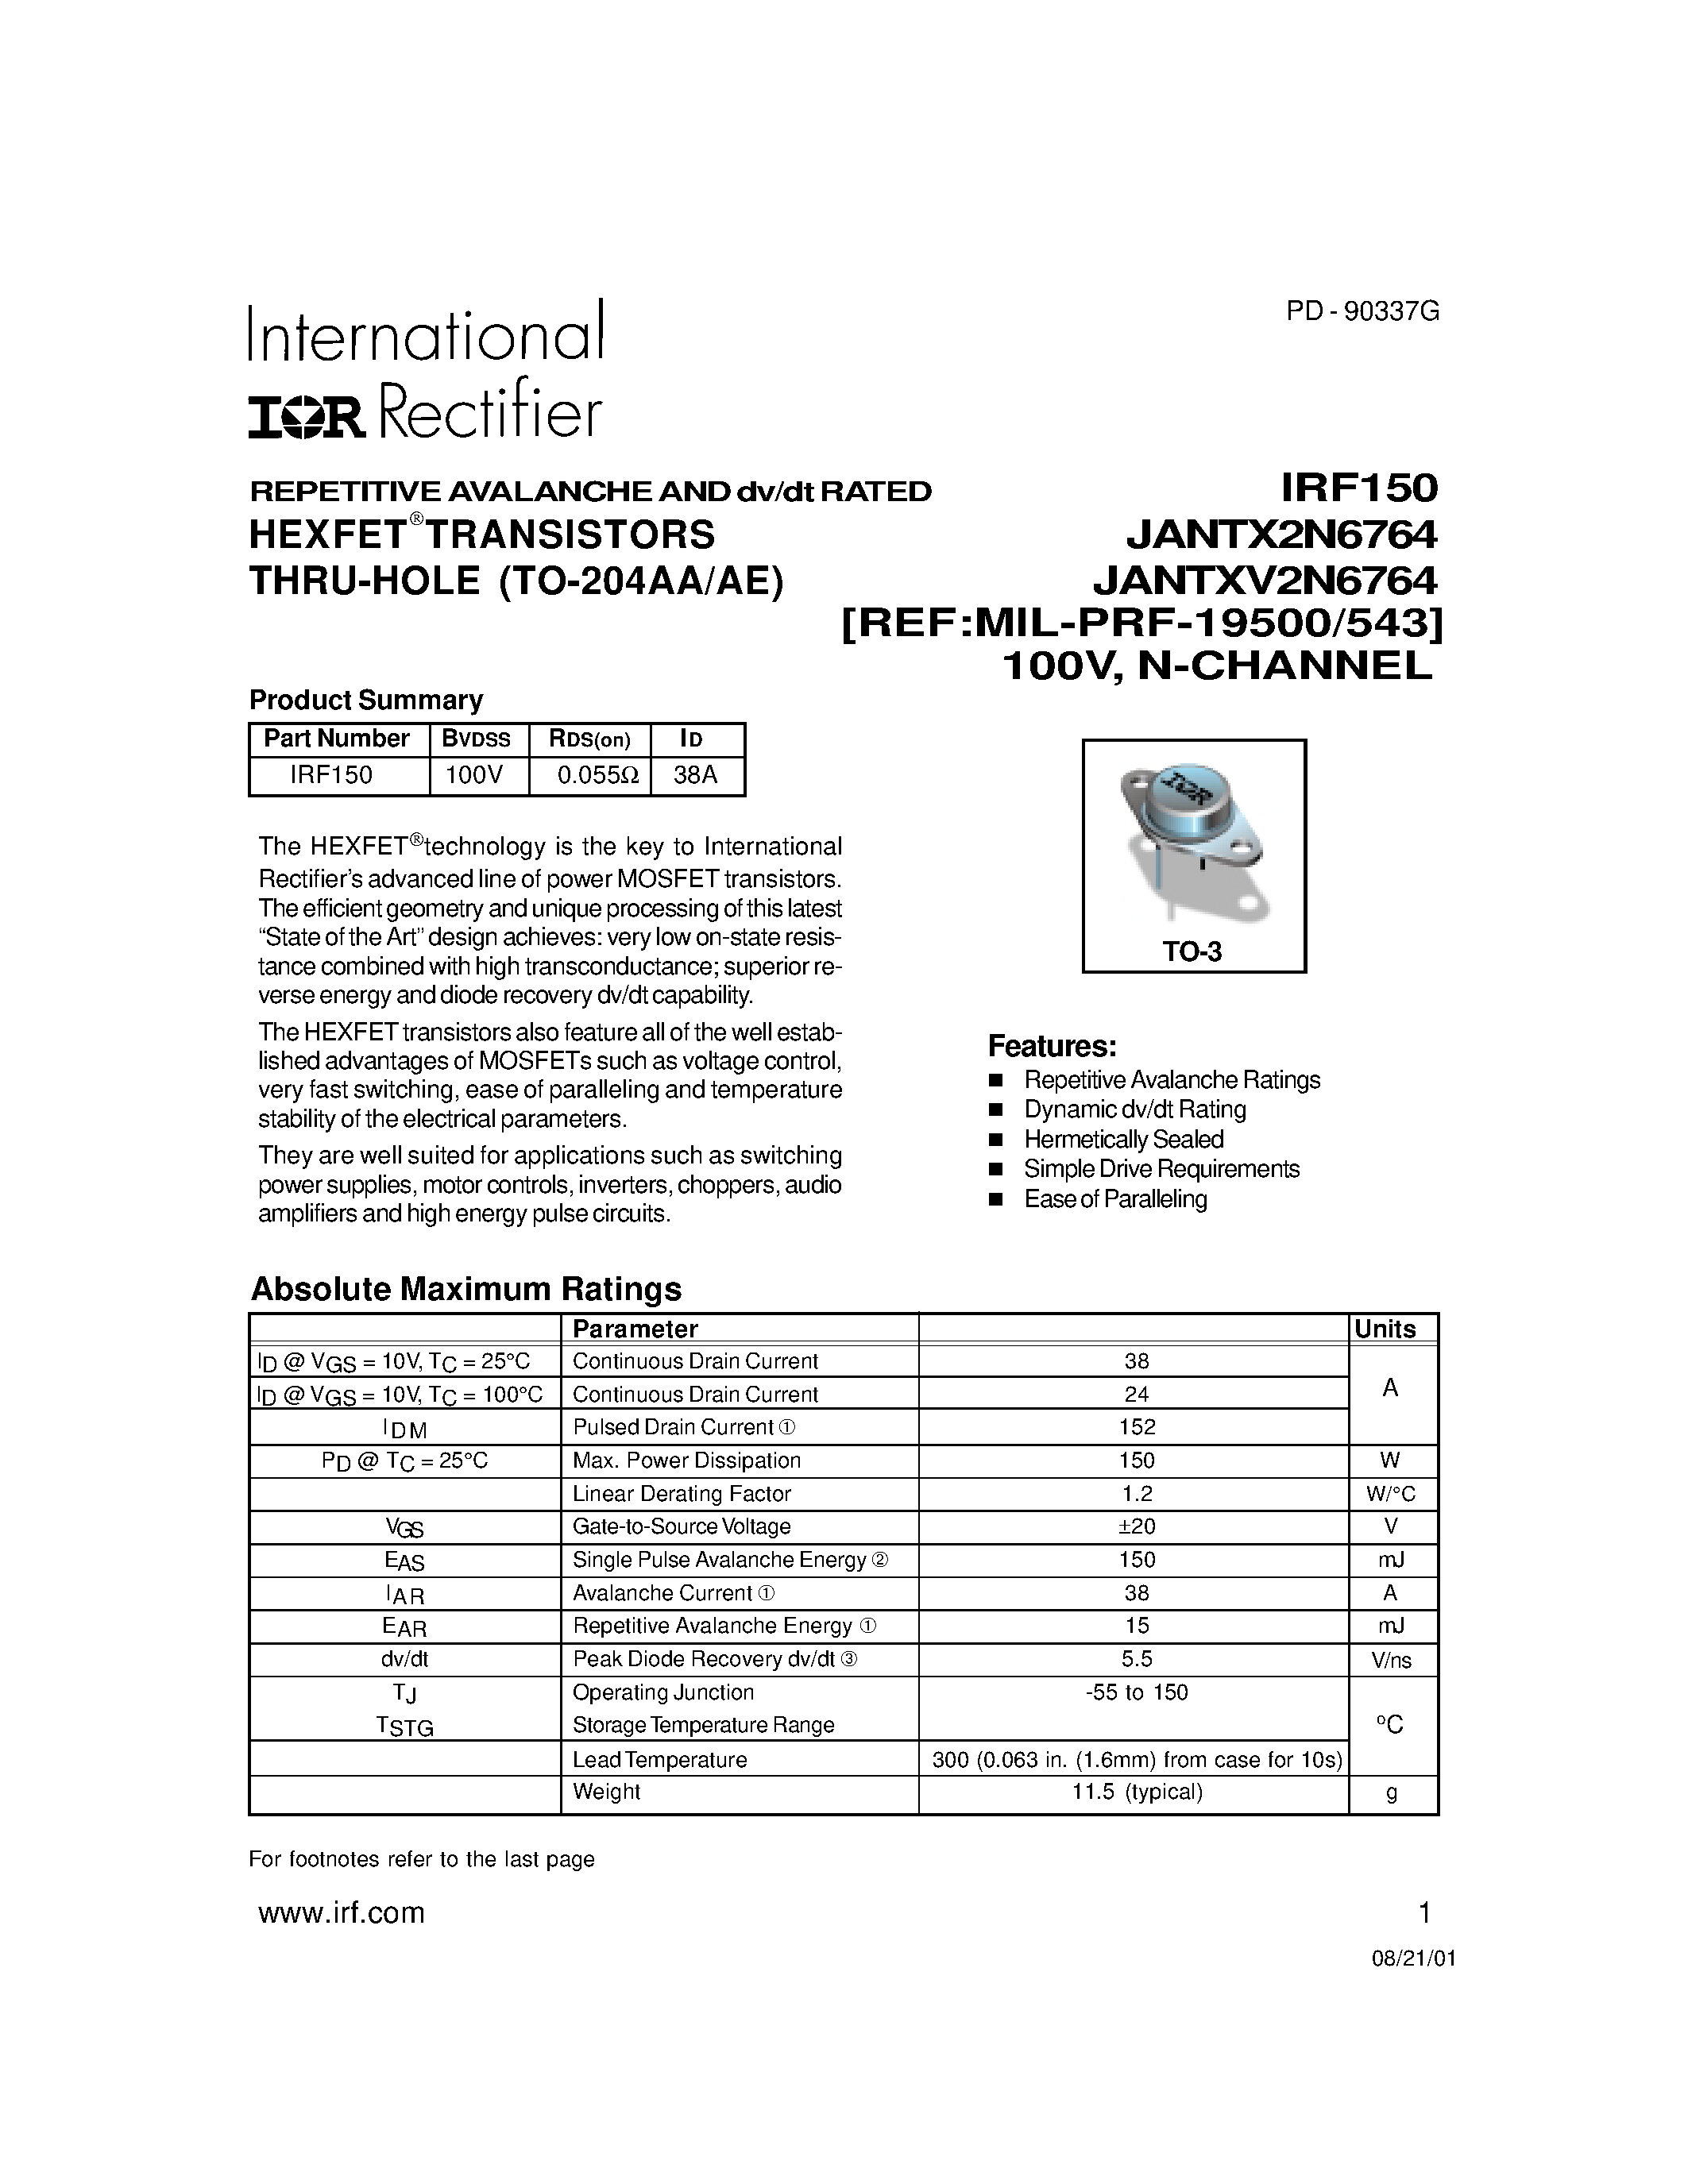 Datasheet IRF150 - TRANSISTORS N-CHANNEL(Vdss=100V/ Rds(on)=0.055ohm/ Id= 38A) page 1